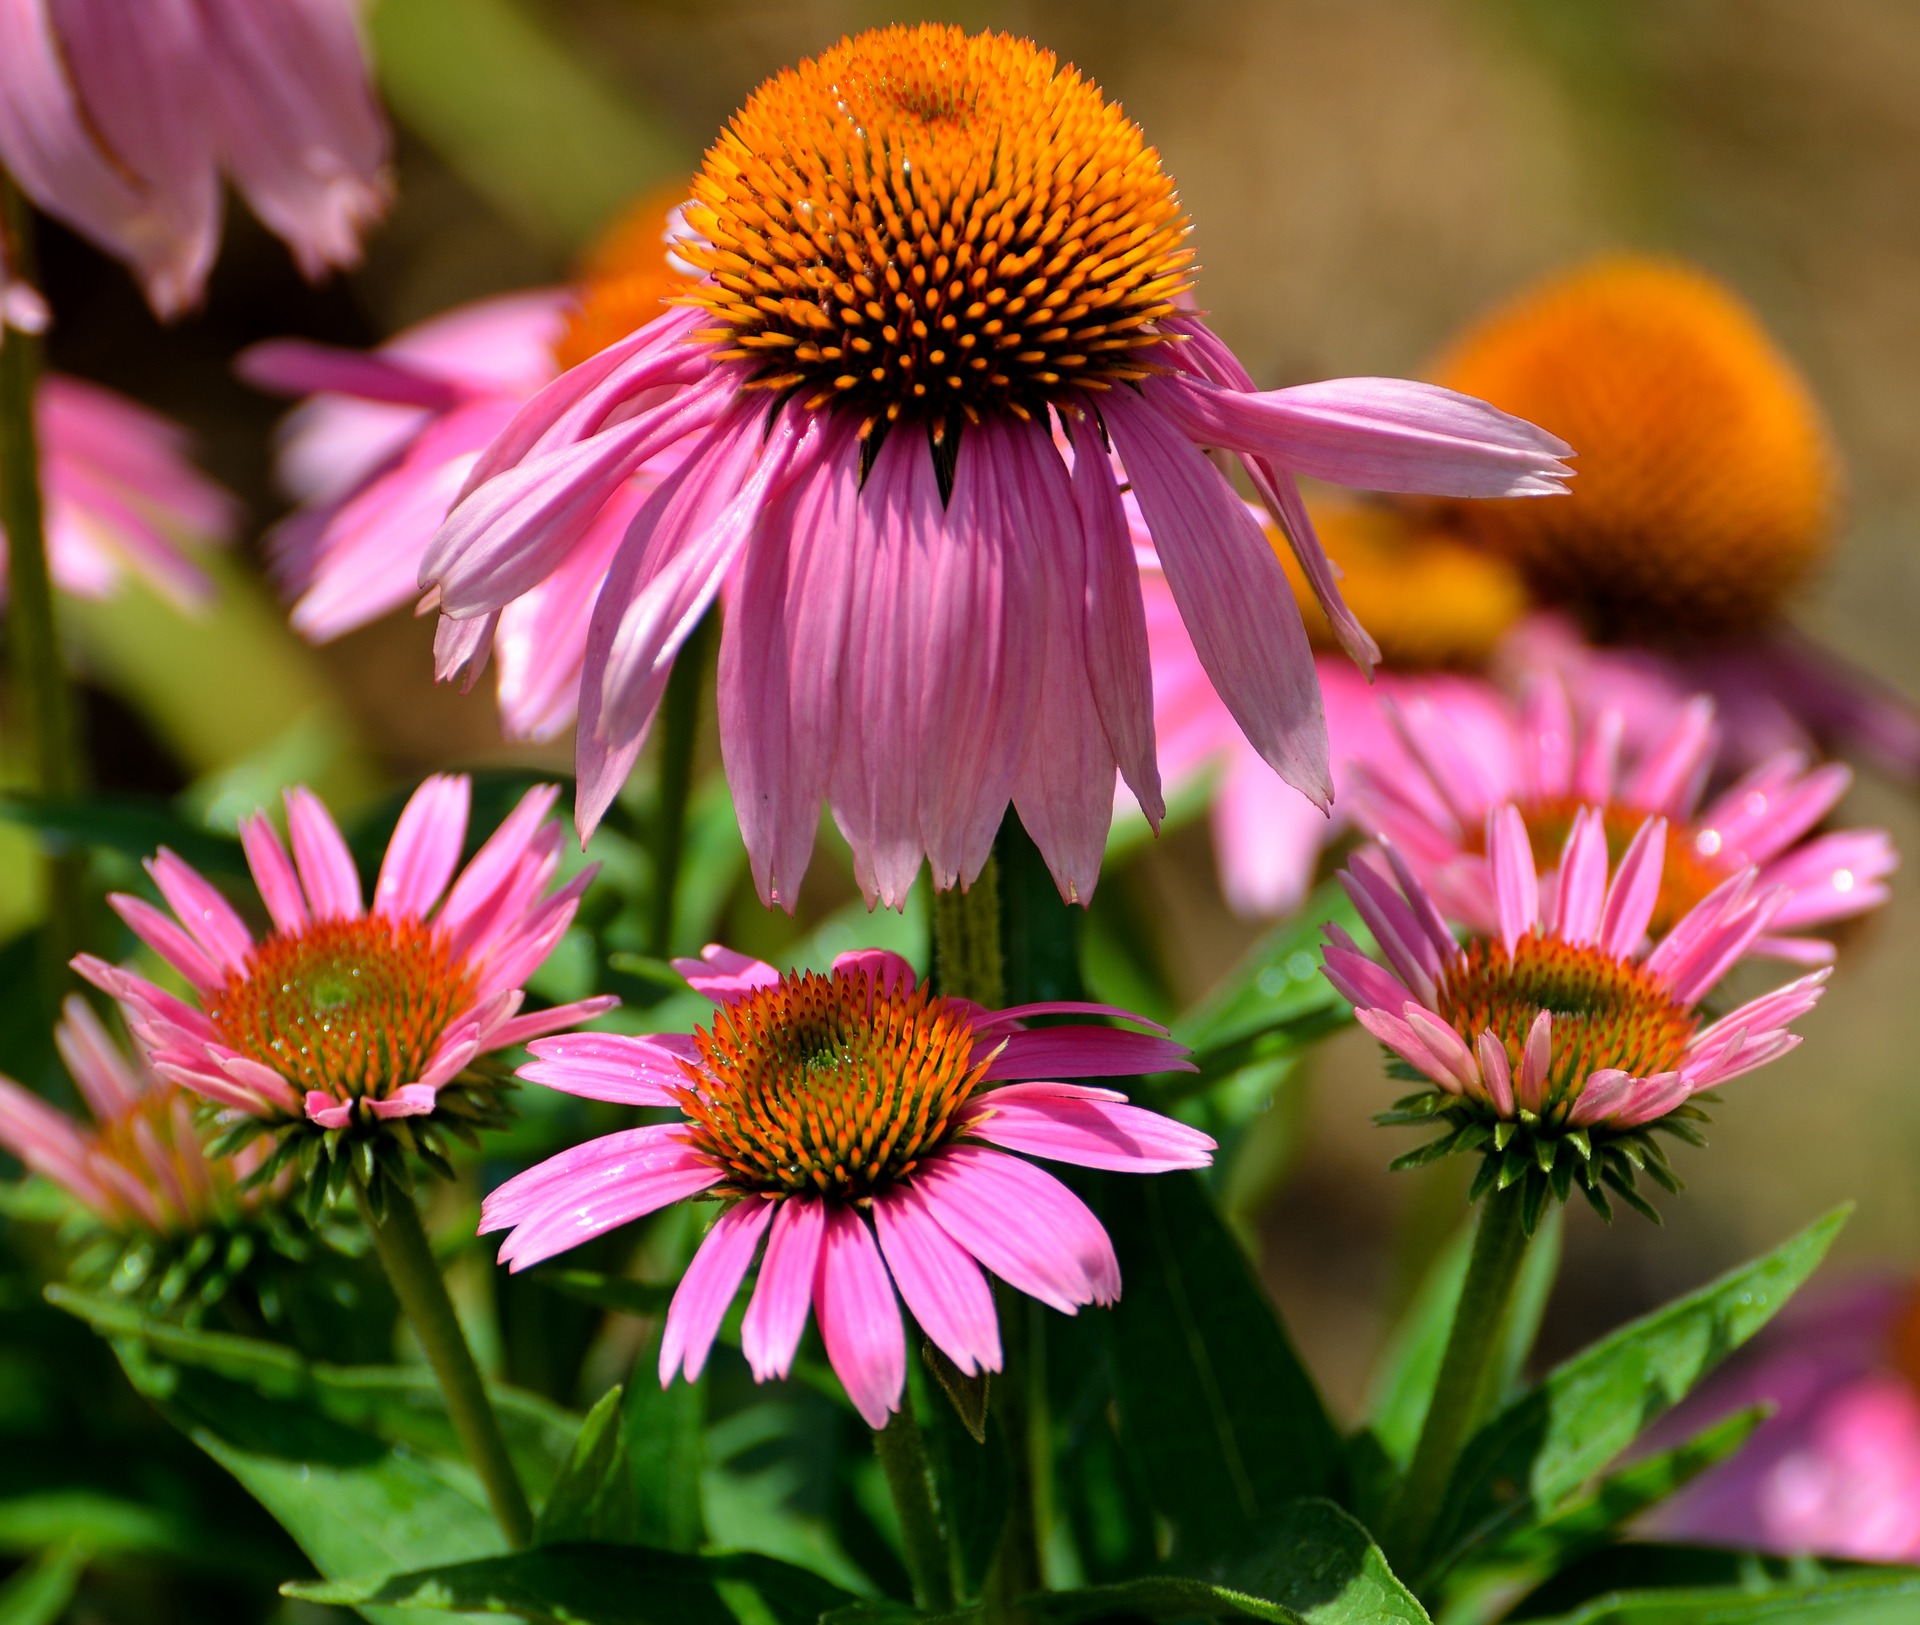 Perennials, those plants that return each year, provide a low-maintenance way to have a beautiful, colorful garden. 